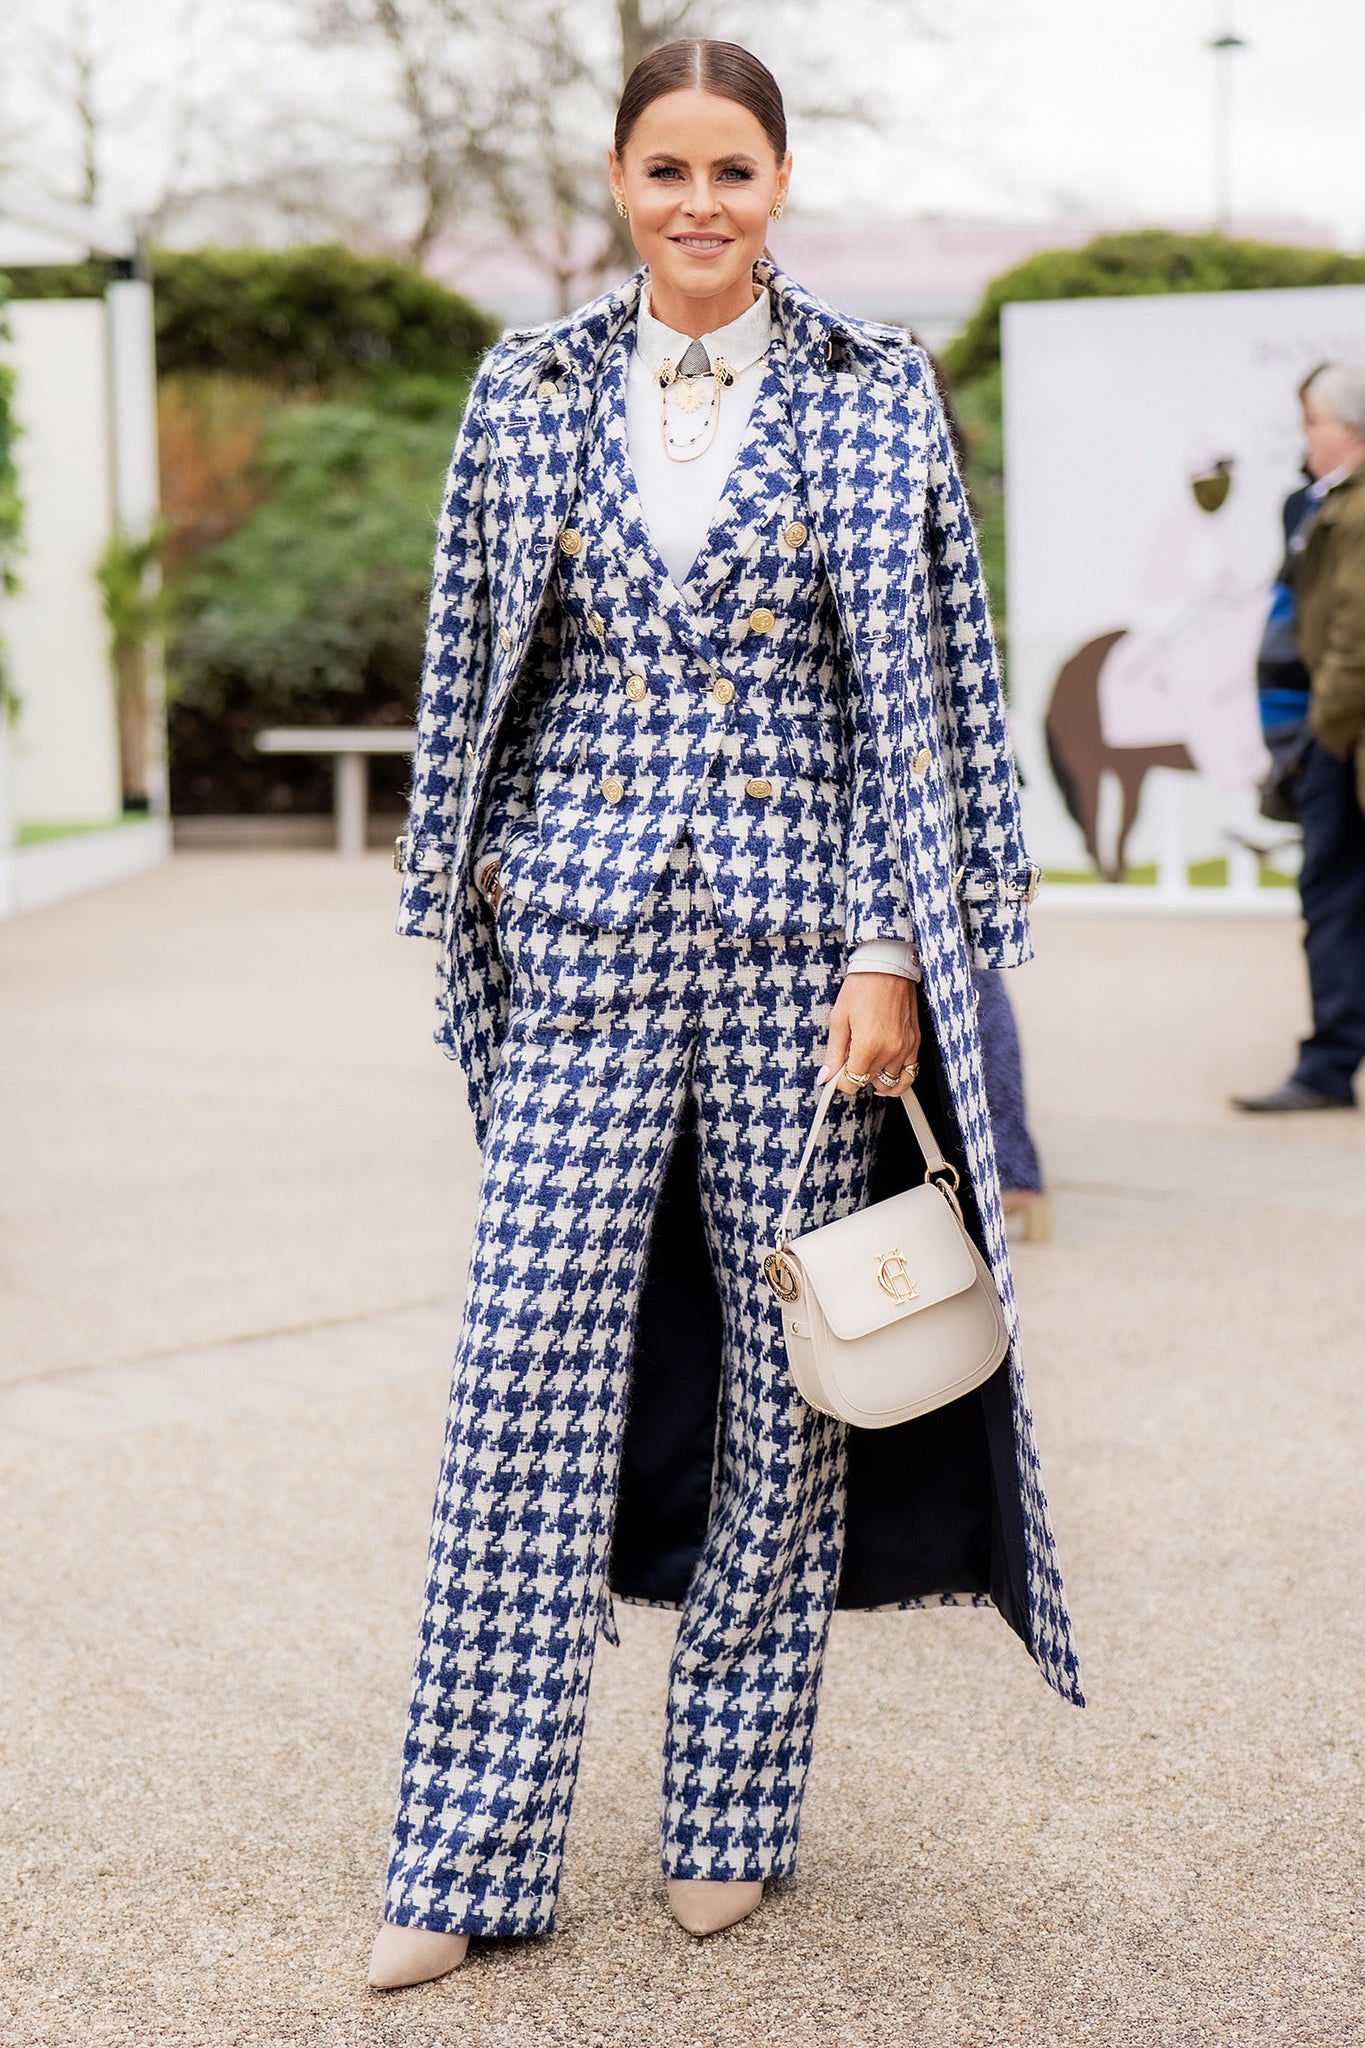 Jade's Large Scale Navy Houndstooth Look